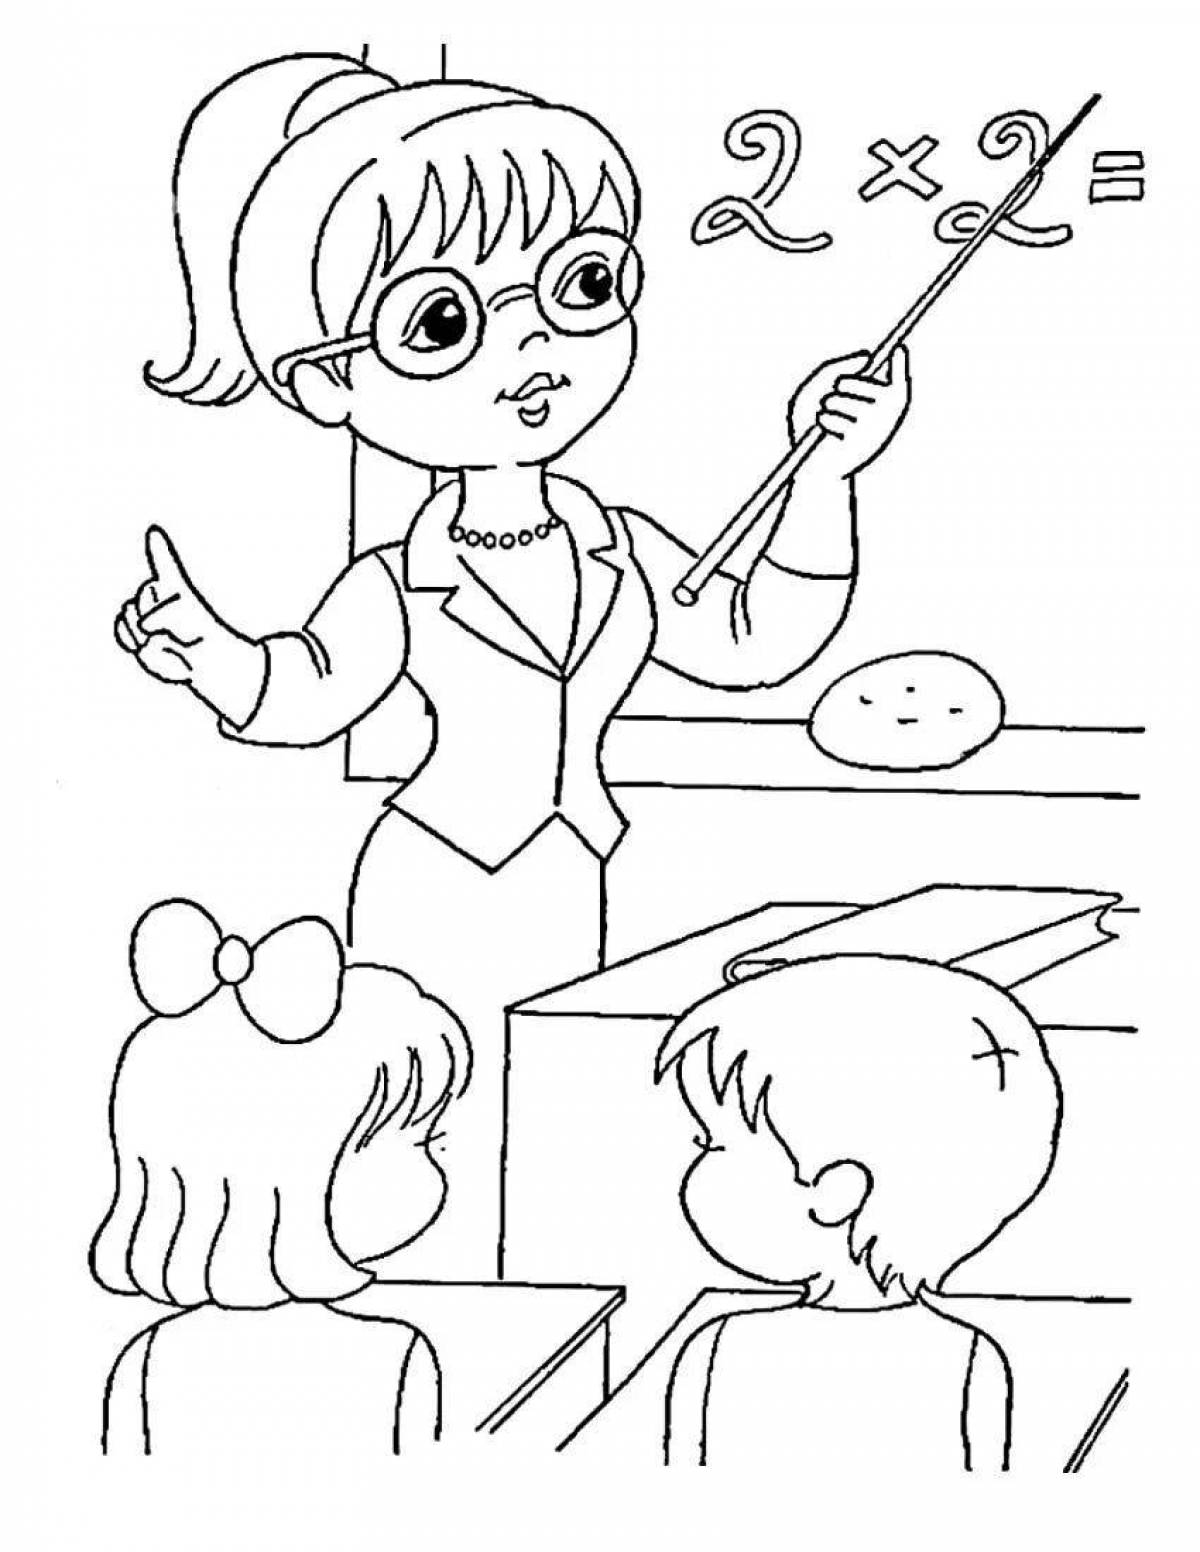 Bright coloring page 